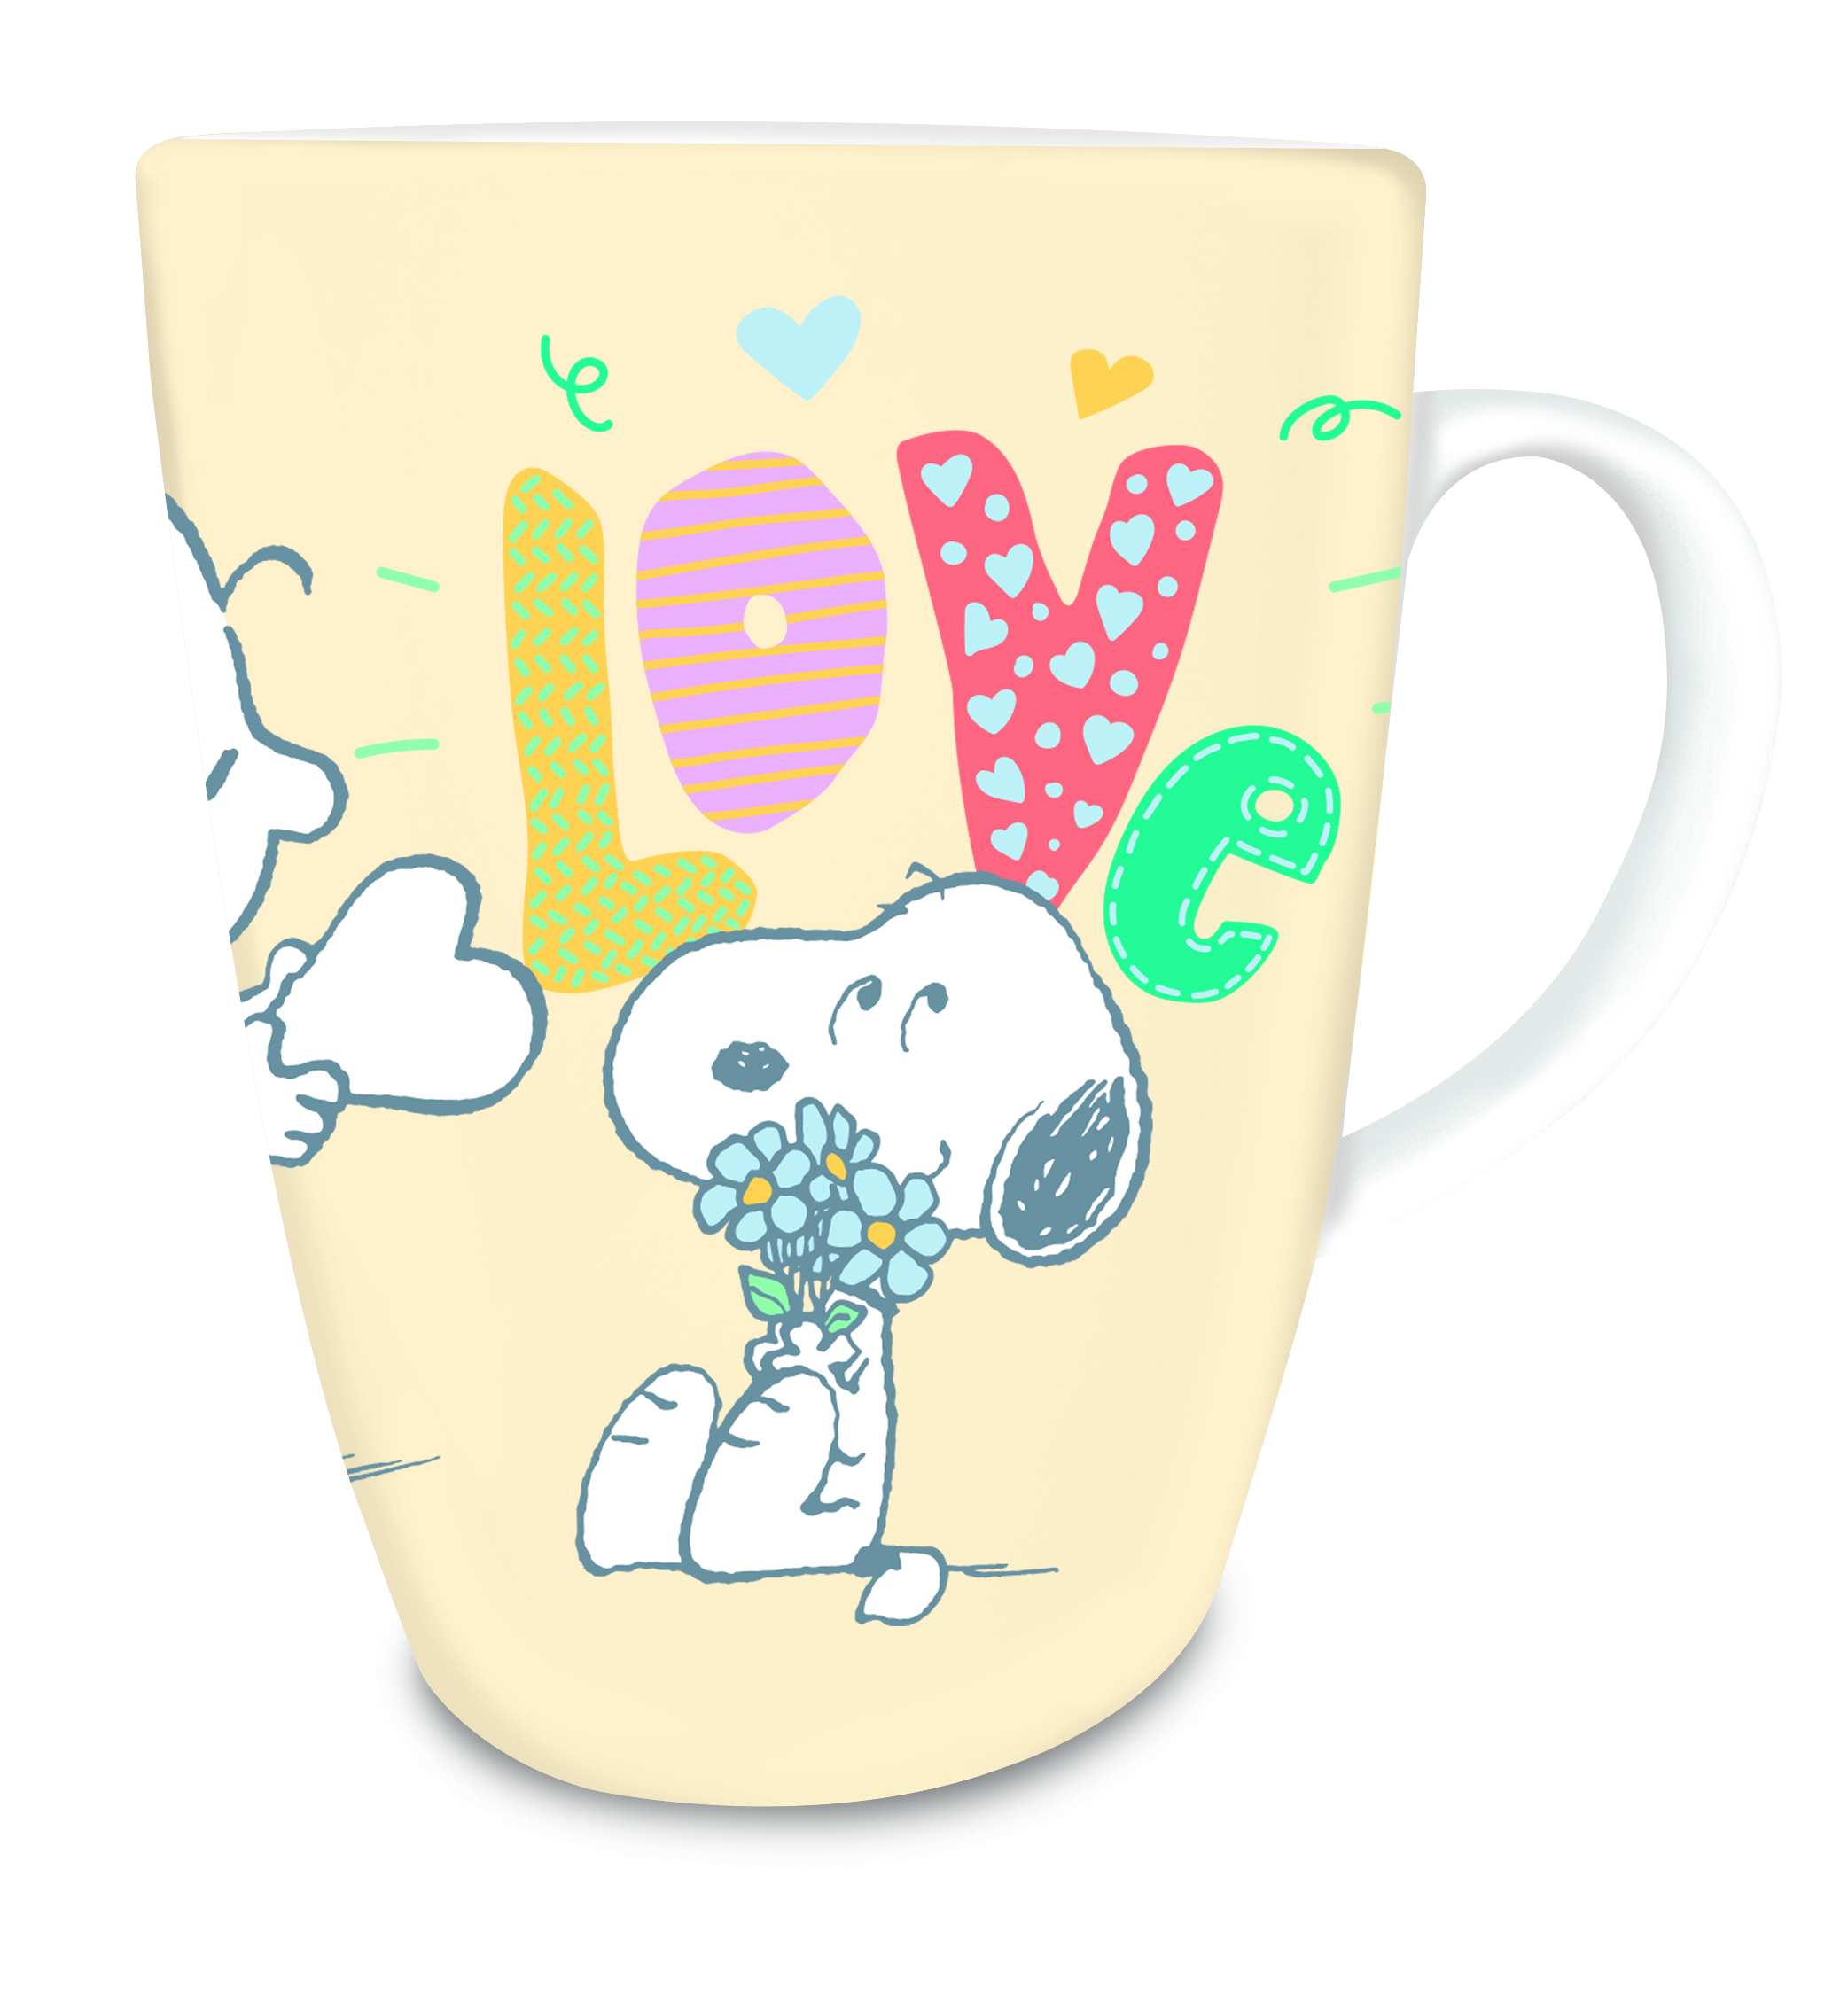 Get a free limited edition Peanuts Snoopy Cup with purchase of Darlie toothpastes - 4